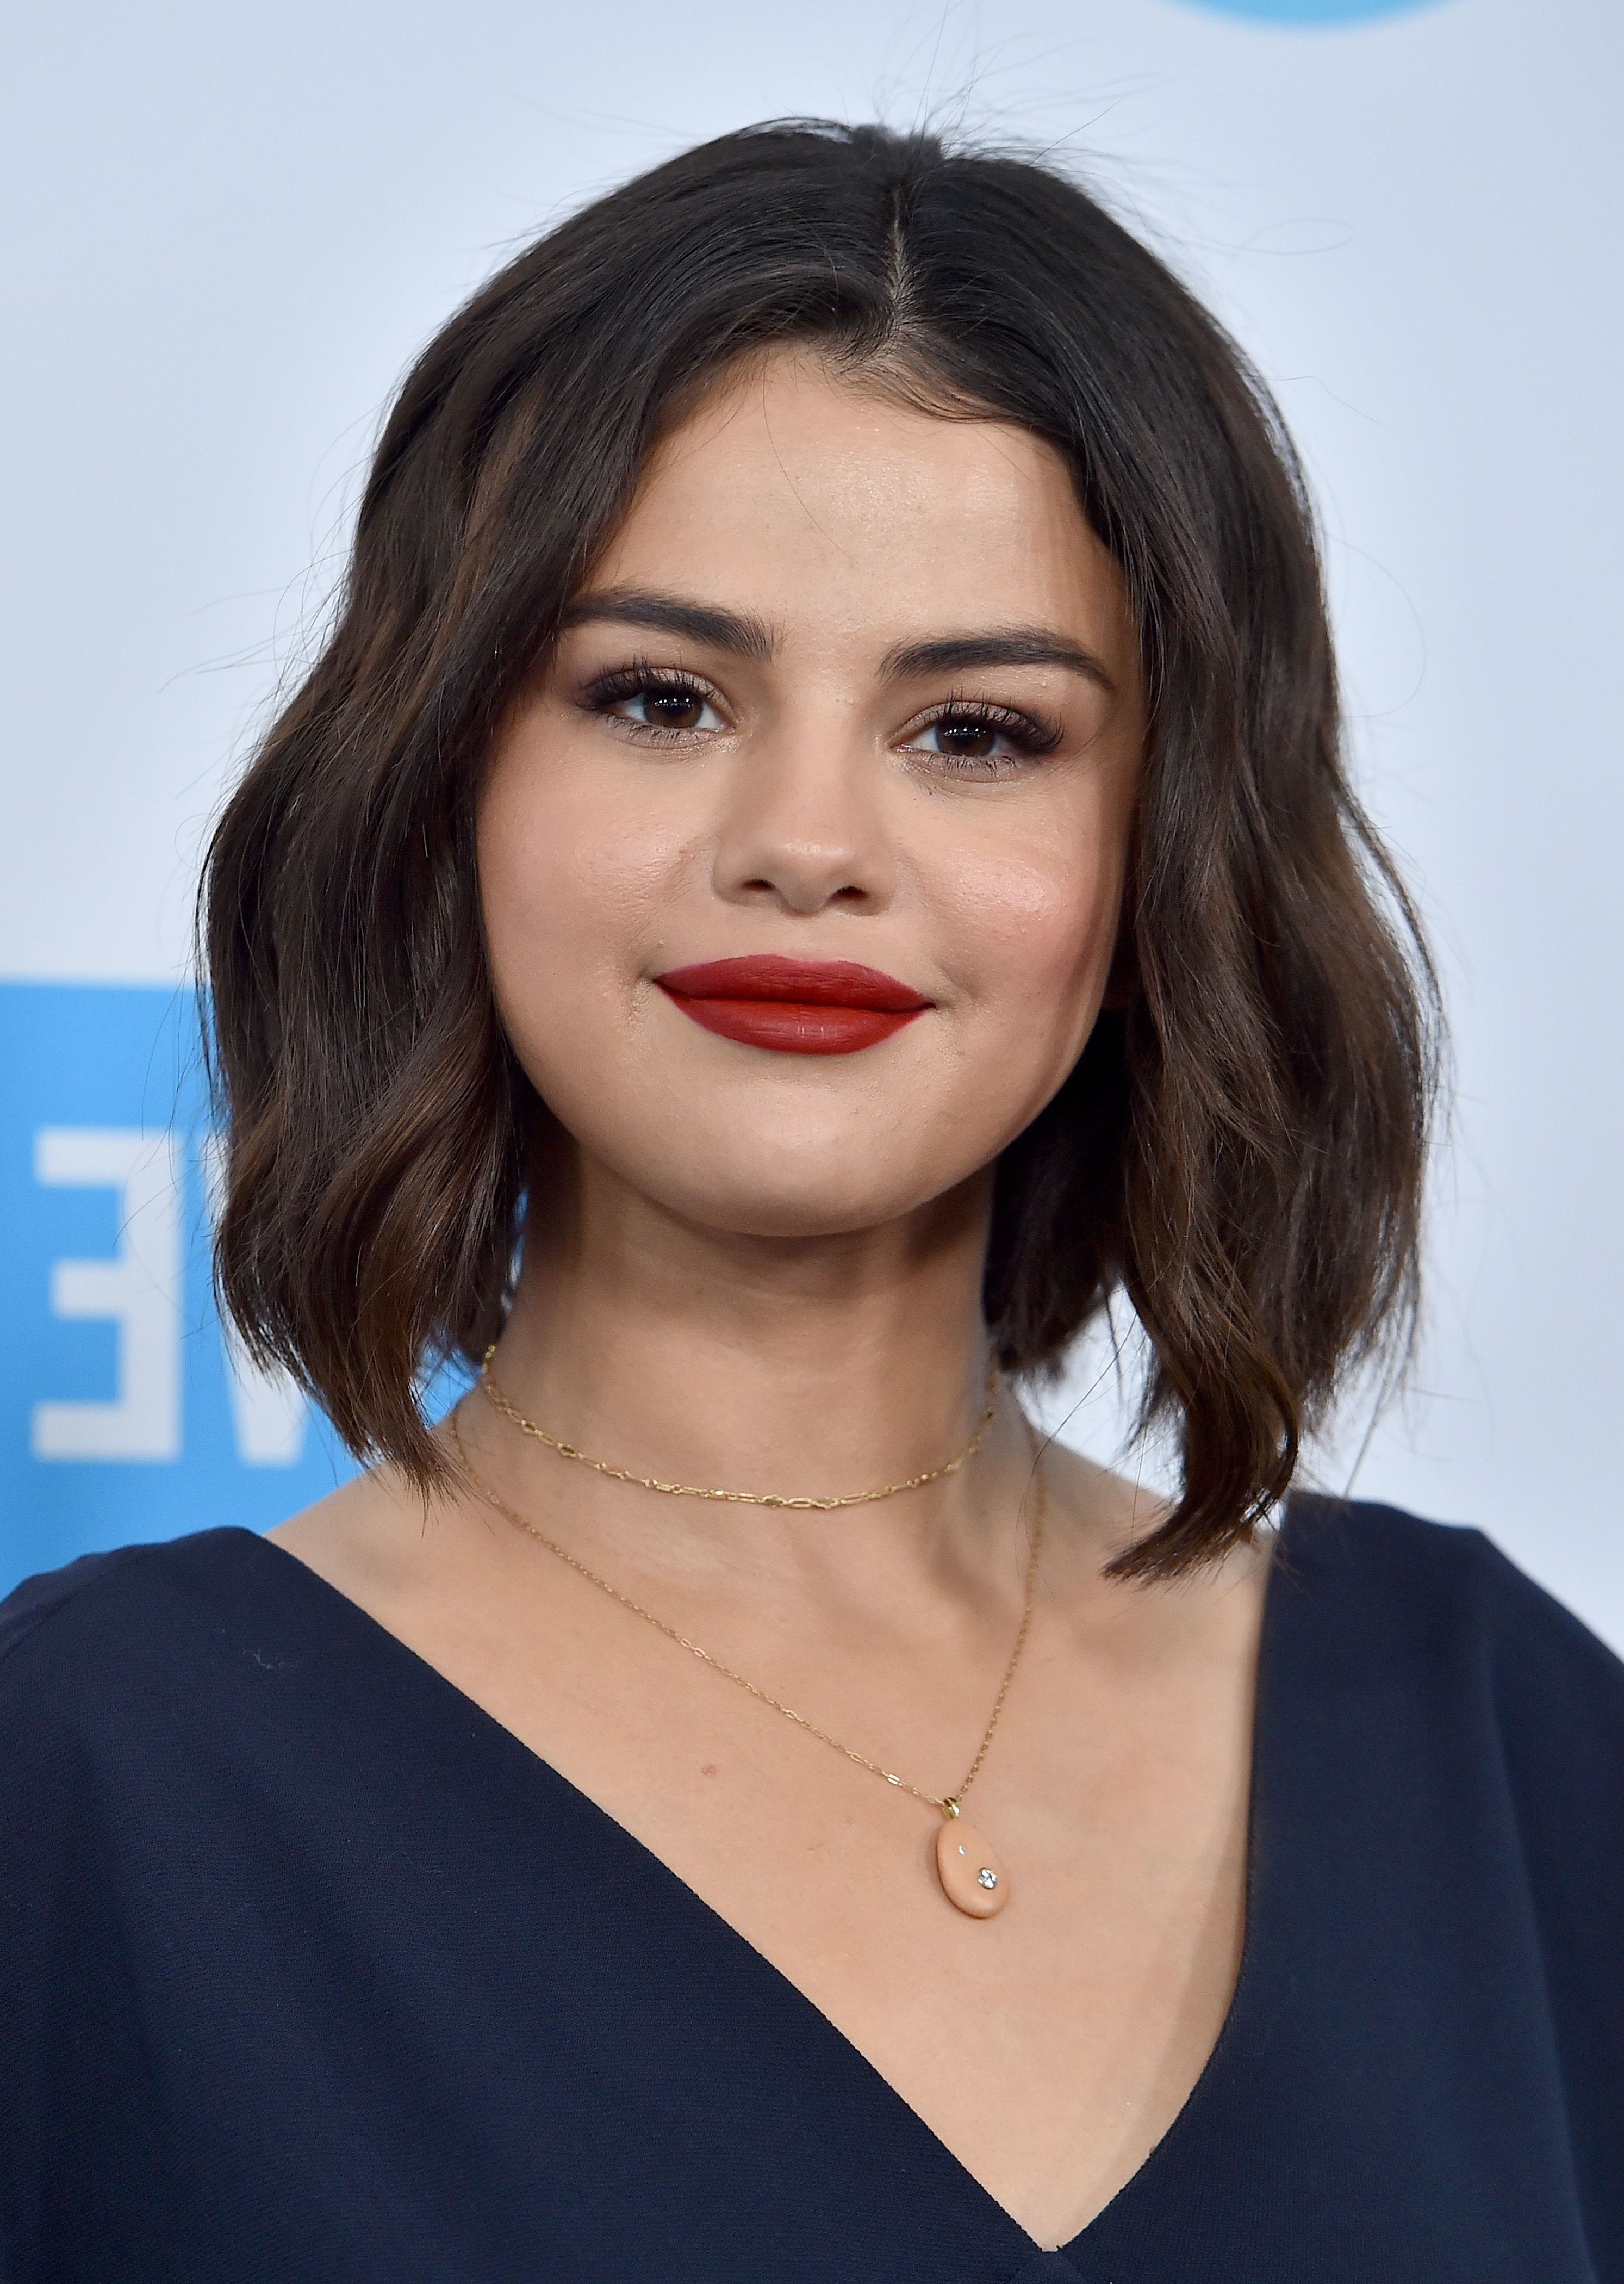 30+ Best Selena Gomez Hairstyles, From Short Hair And Shaved To Bangs Within Selena Gomez Short Hairstyles (View 3 of 25)